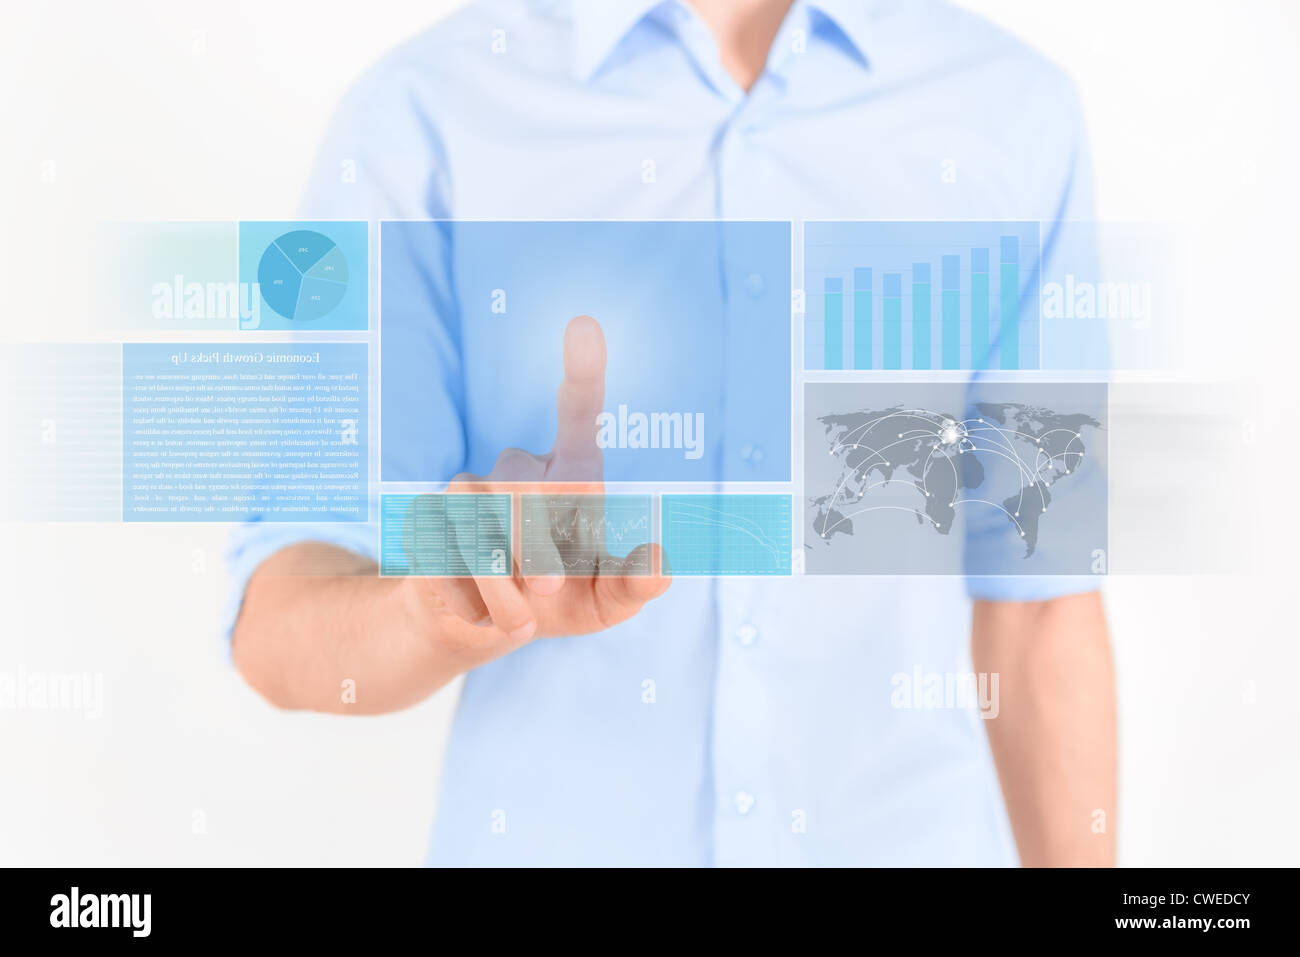 Man touching futuristic touchscreen interface with some graphic, charts and news. Isolated on white. Stock Photo